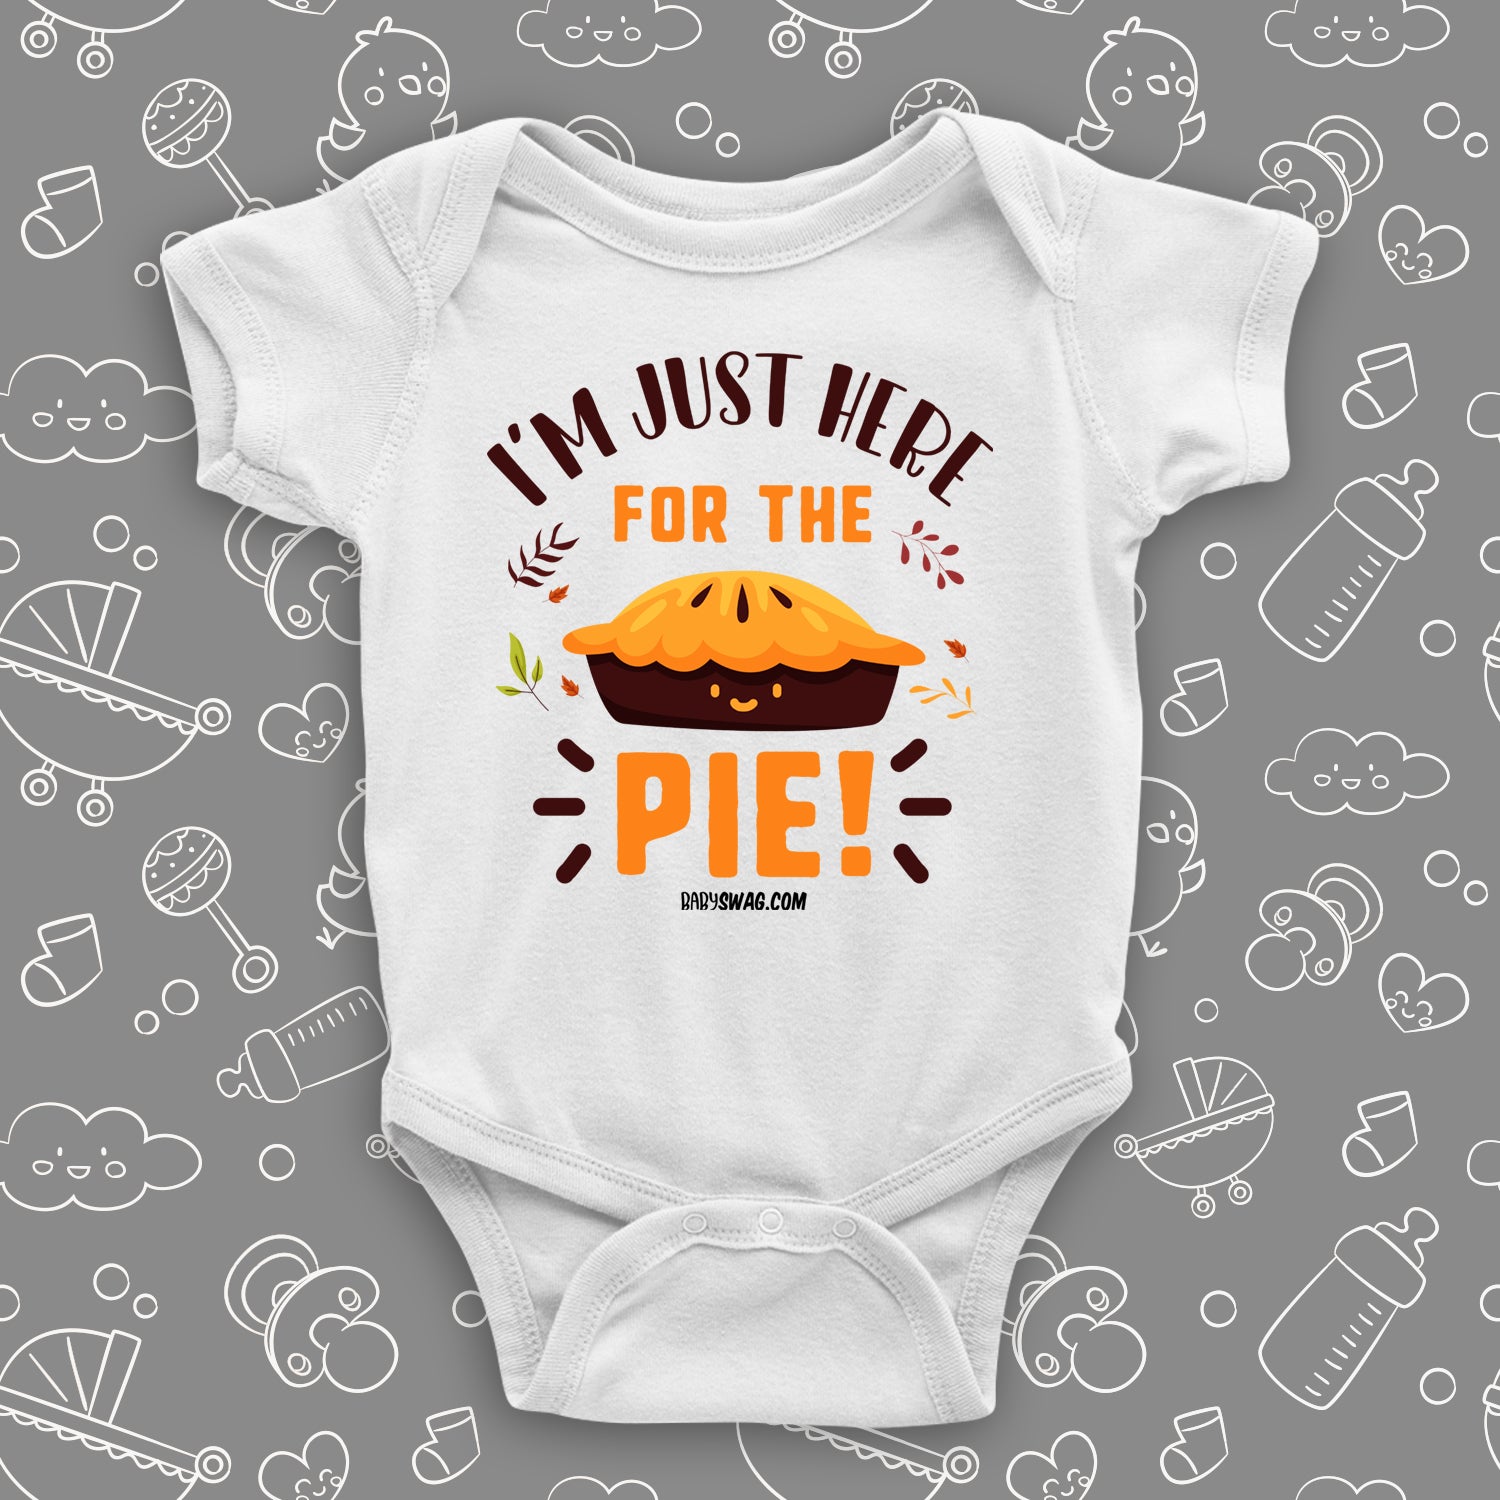 Cute baby onesies with saying "I'm Just Here For The PIe"  in white.